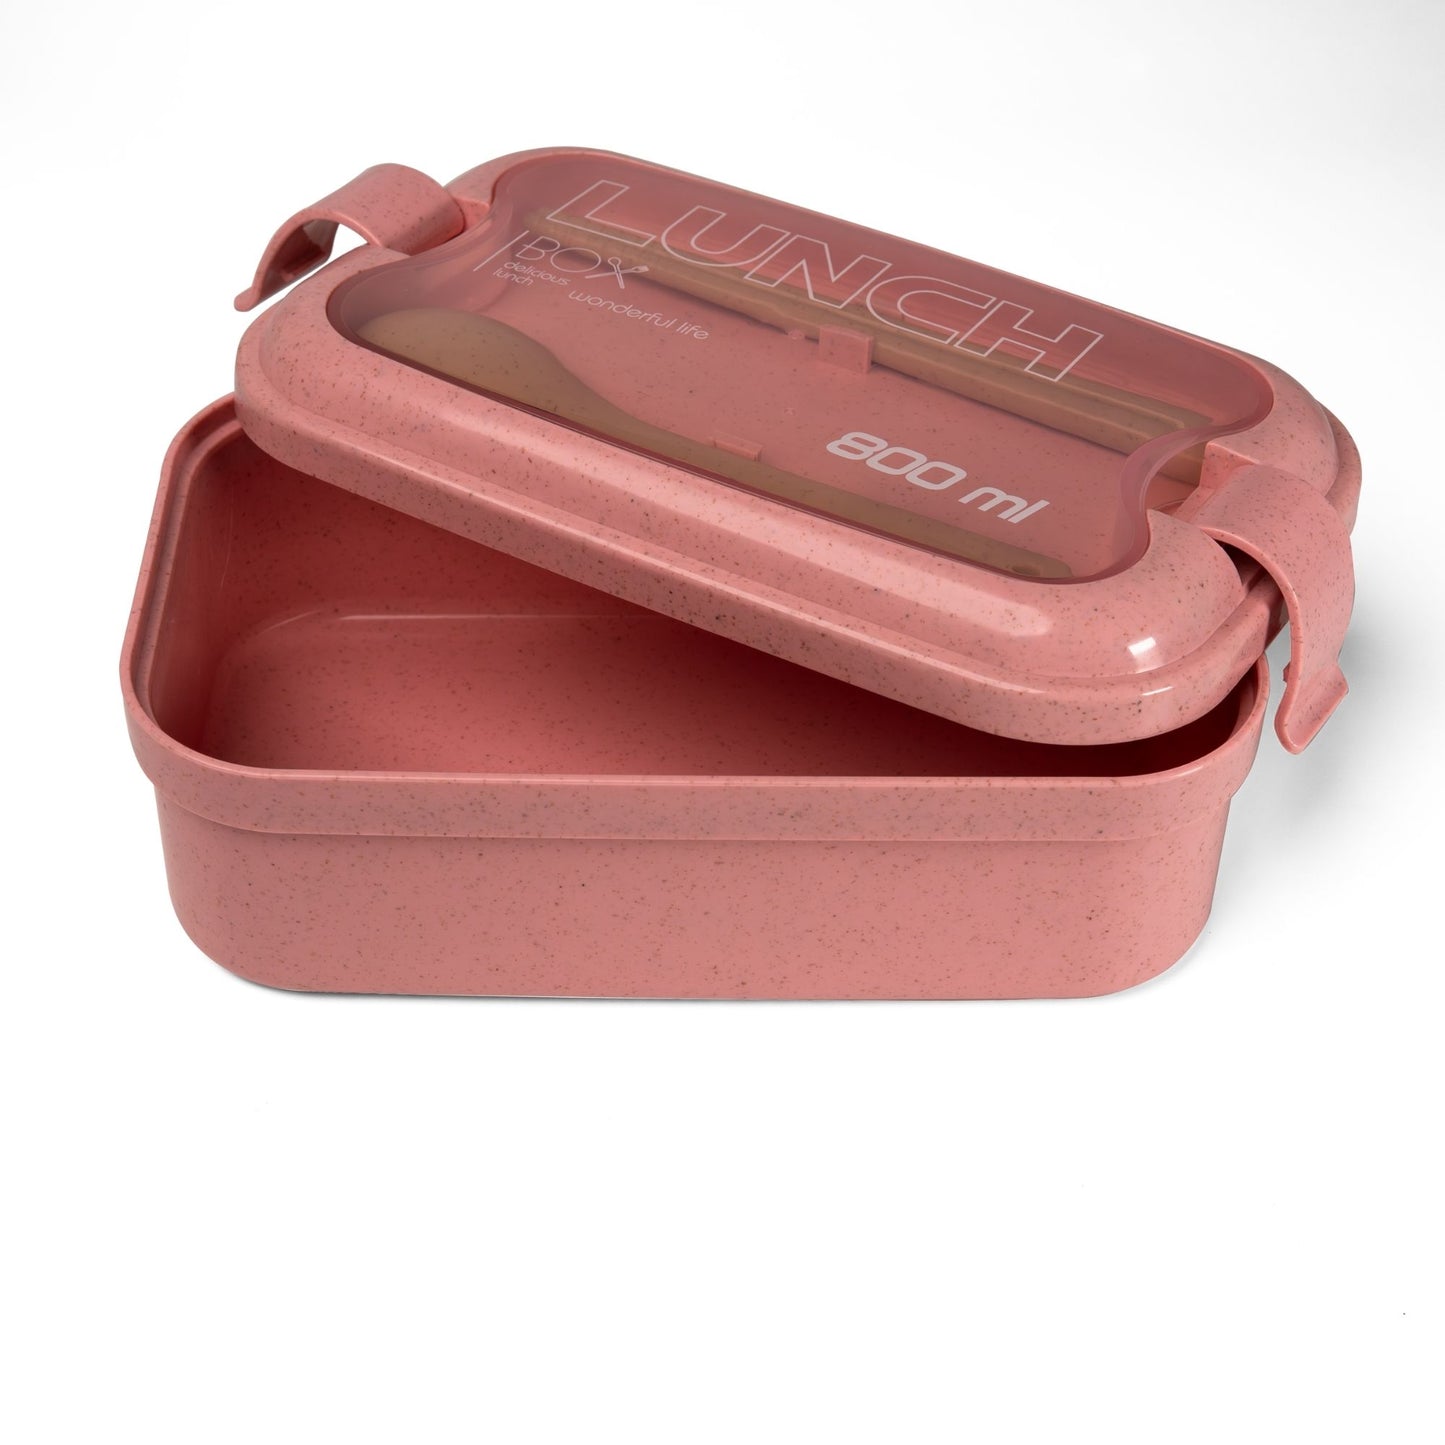 2 Pack Portable Bento Box Lunch Container with Cutlery - 800ml